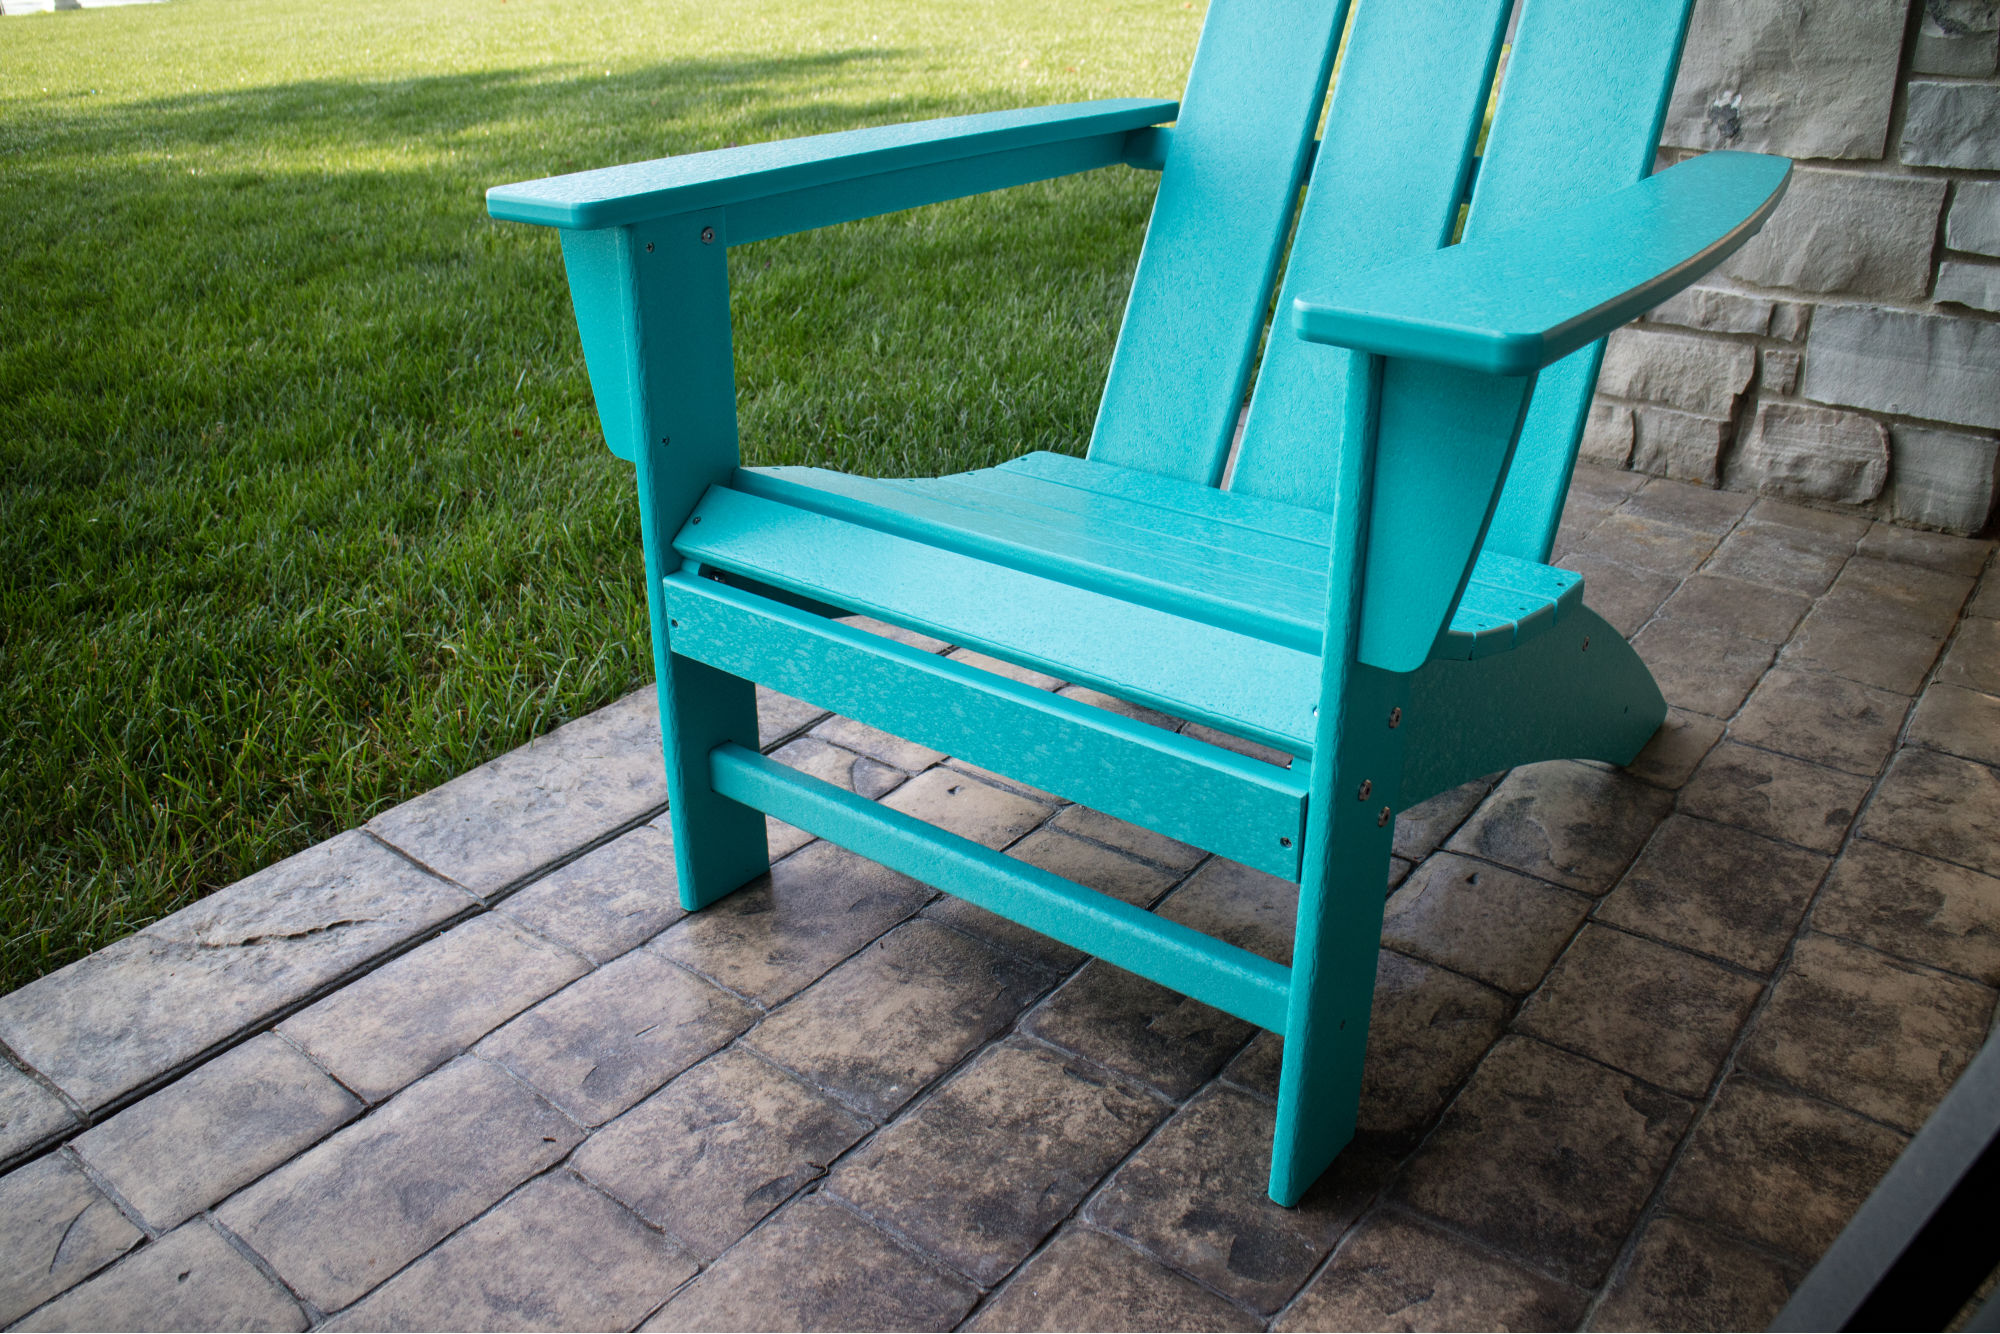 POLYWOOD® Modern Adirondack Chair - AD420 | POLYWOOD® Official Store